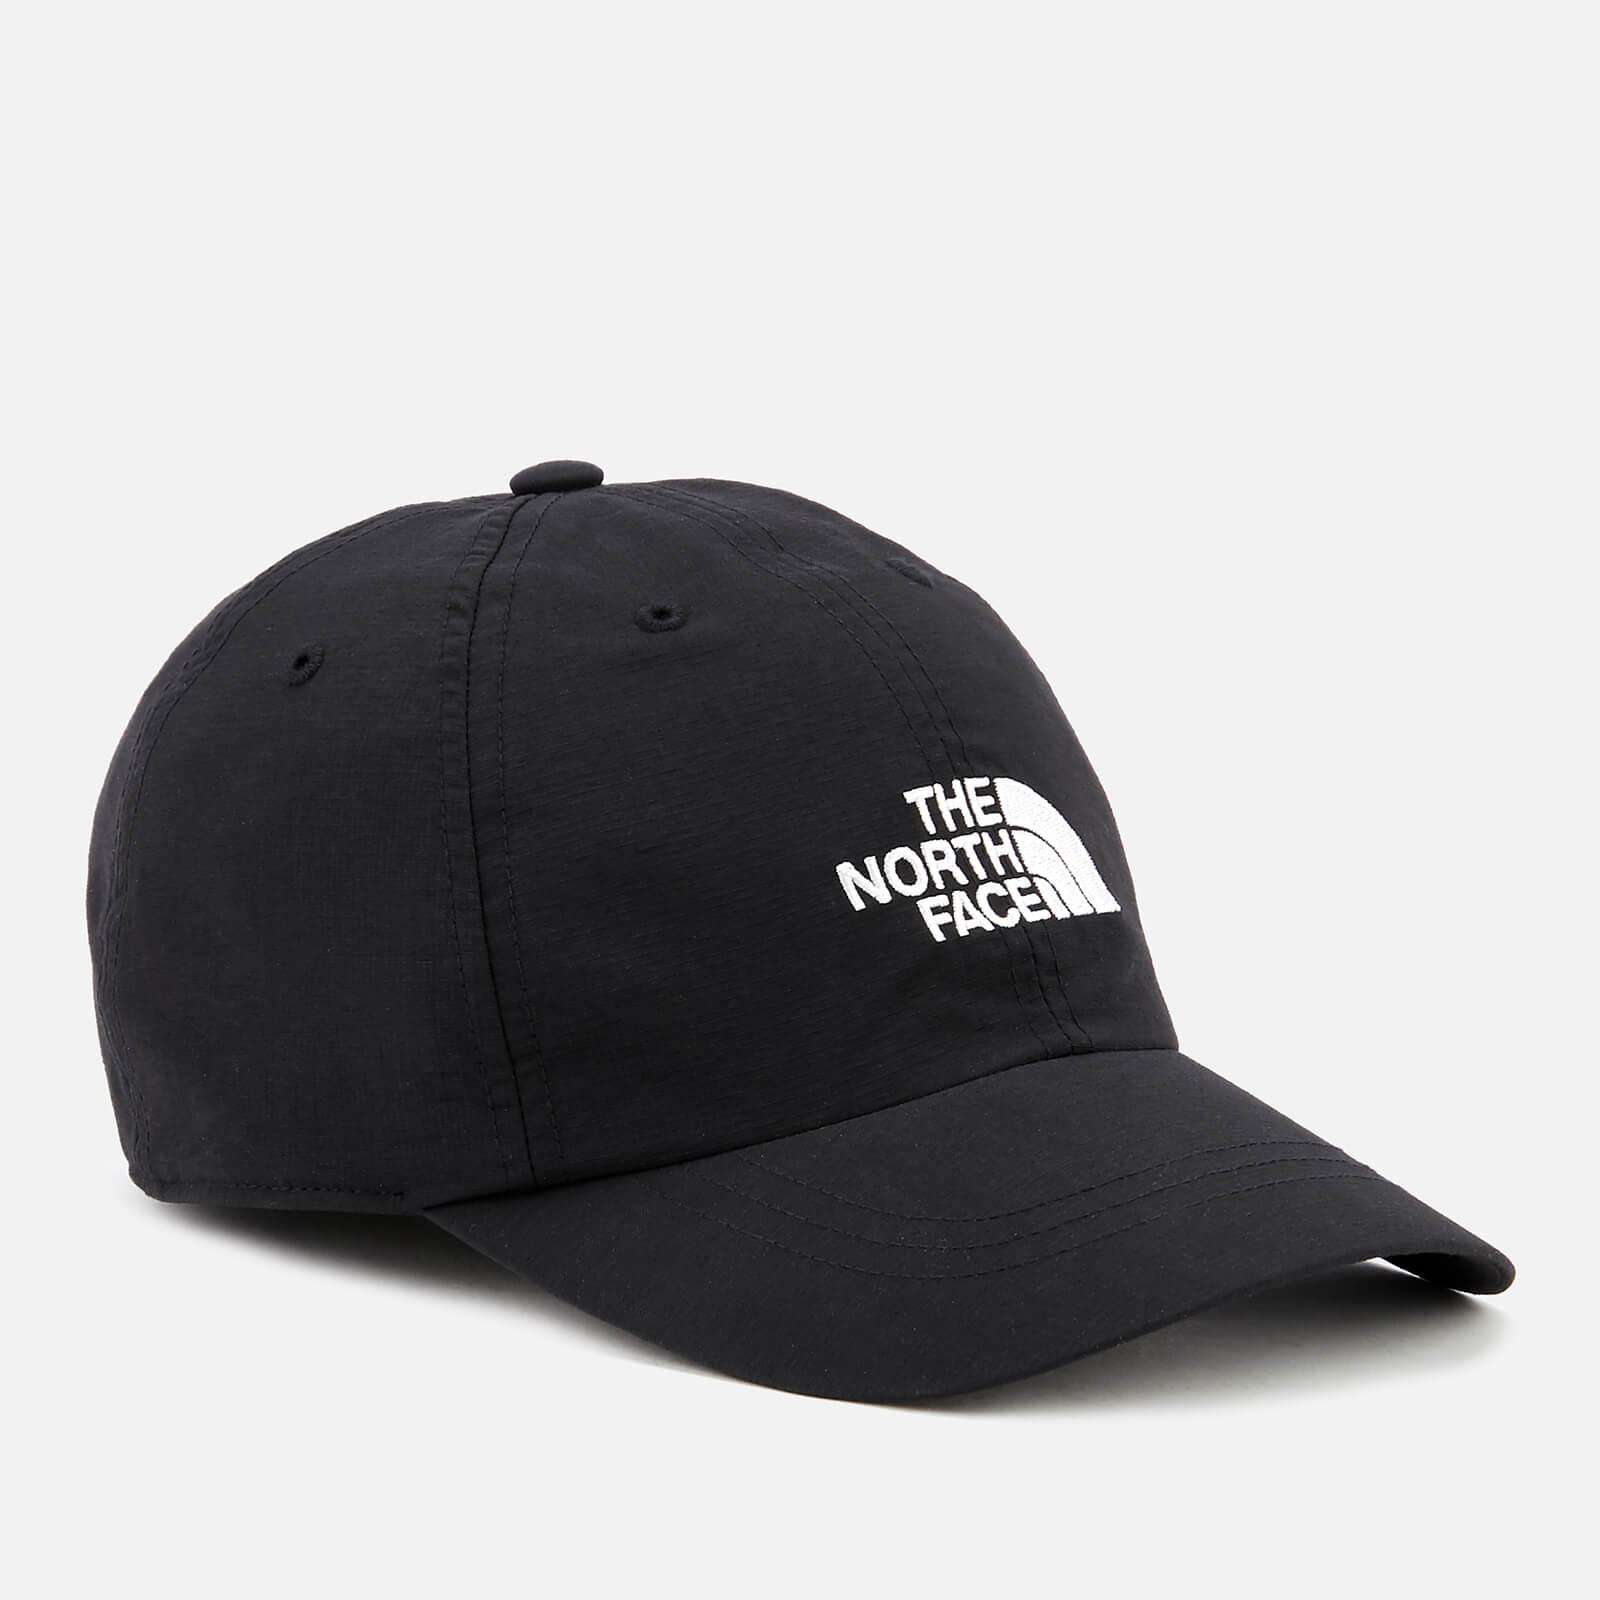 The North Face Horizon Hat in Black for Men - Lyst